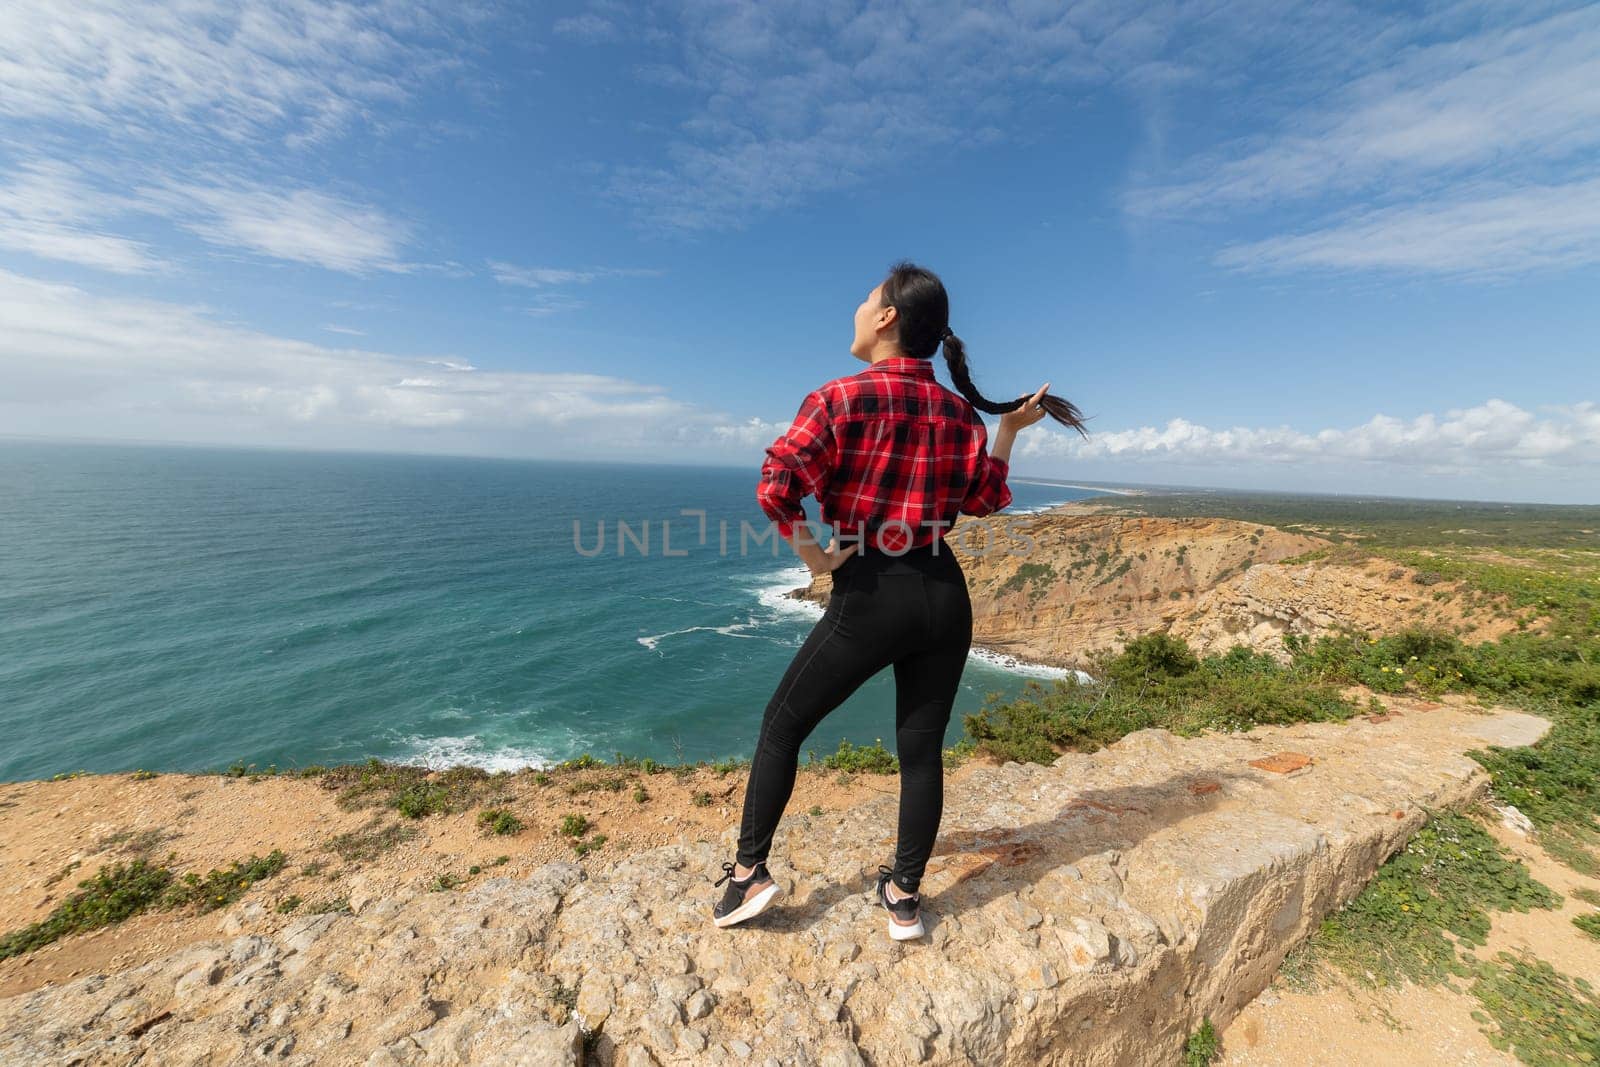 A woman stands on a rocky cliff overlooking the ocean by Studia72